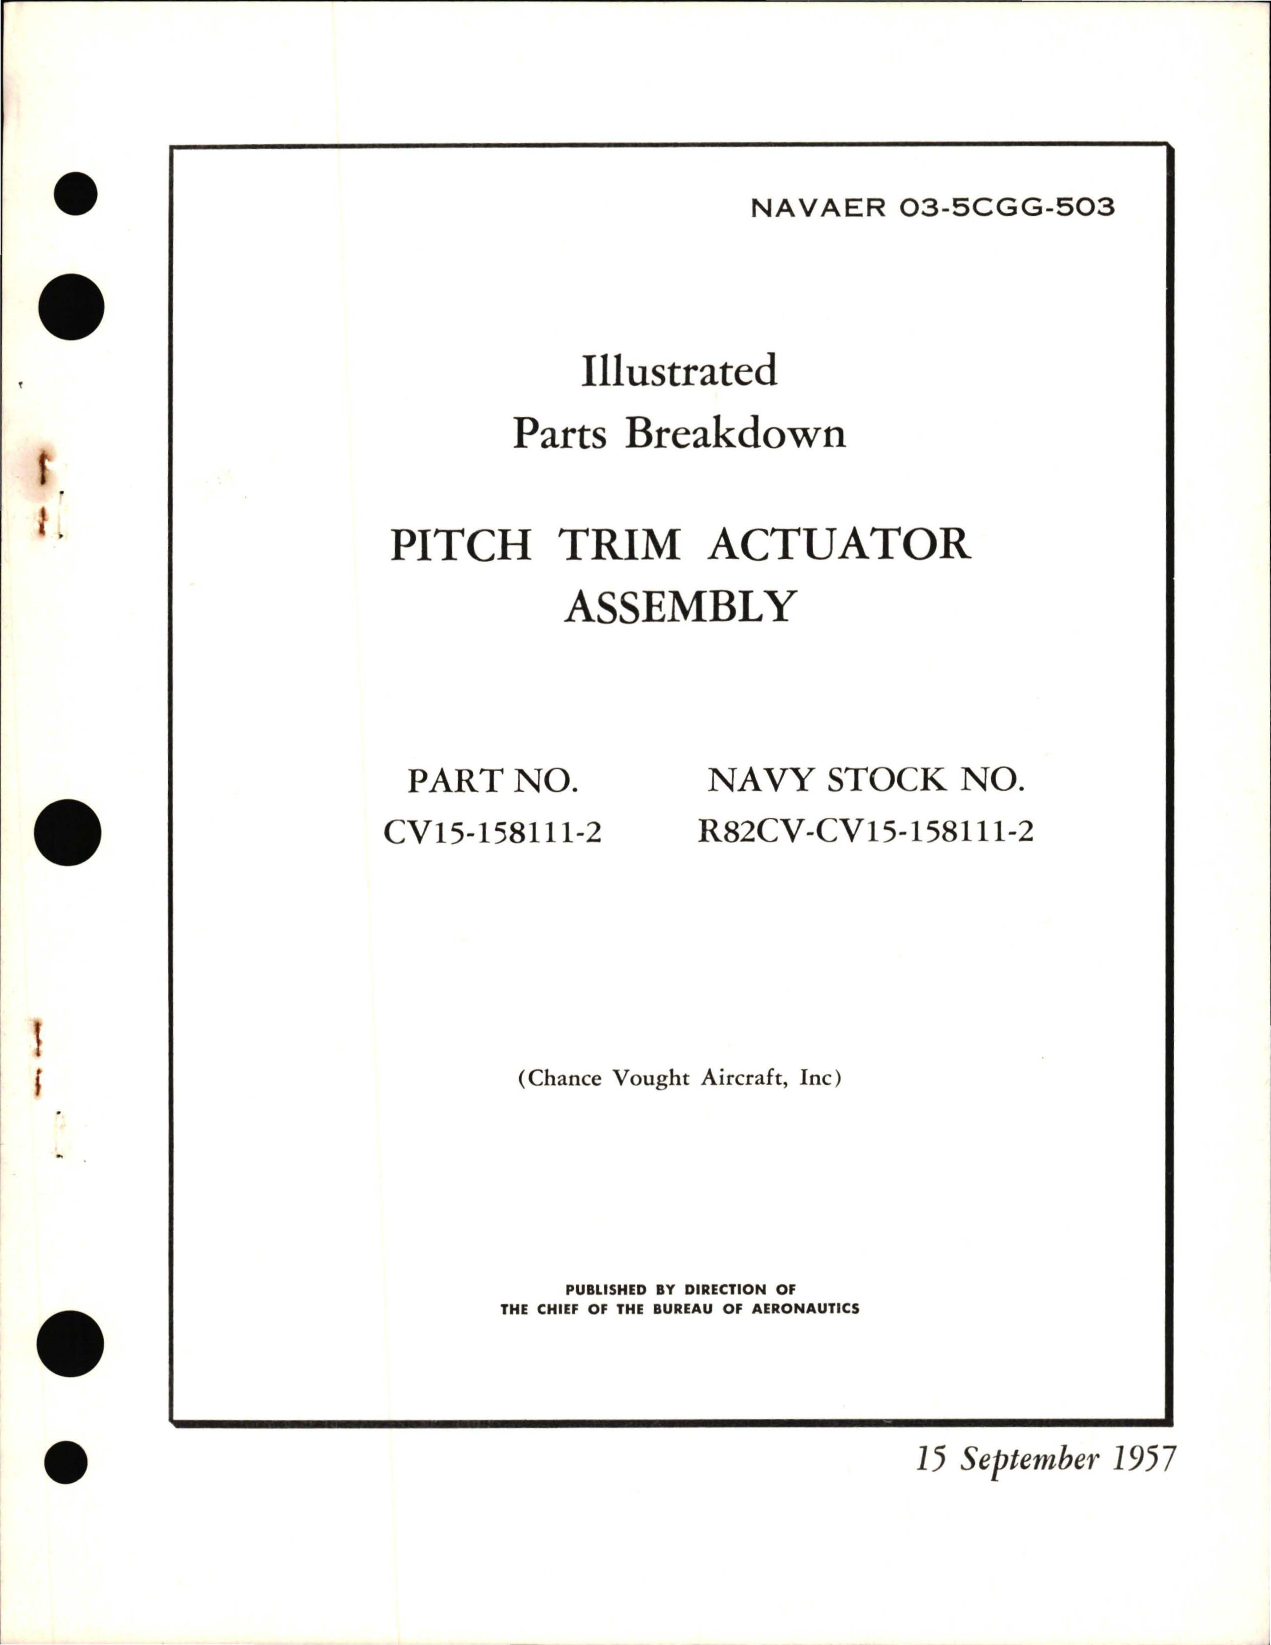 Sample page 1 from AirCorps Library document: Parts Breakdown for Pitch Trim Actuator Assembly - Part CV15-158111-2 